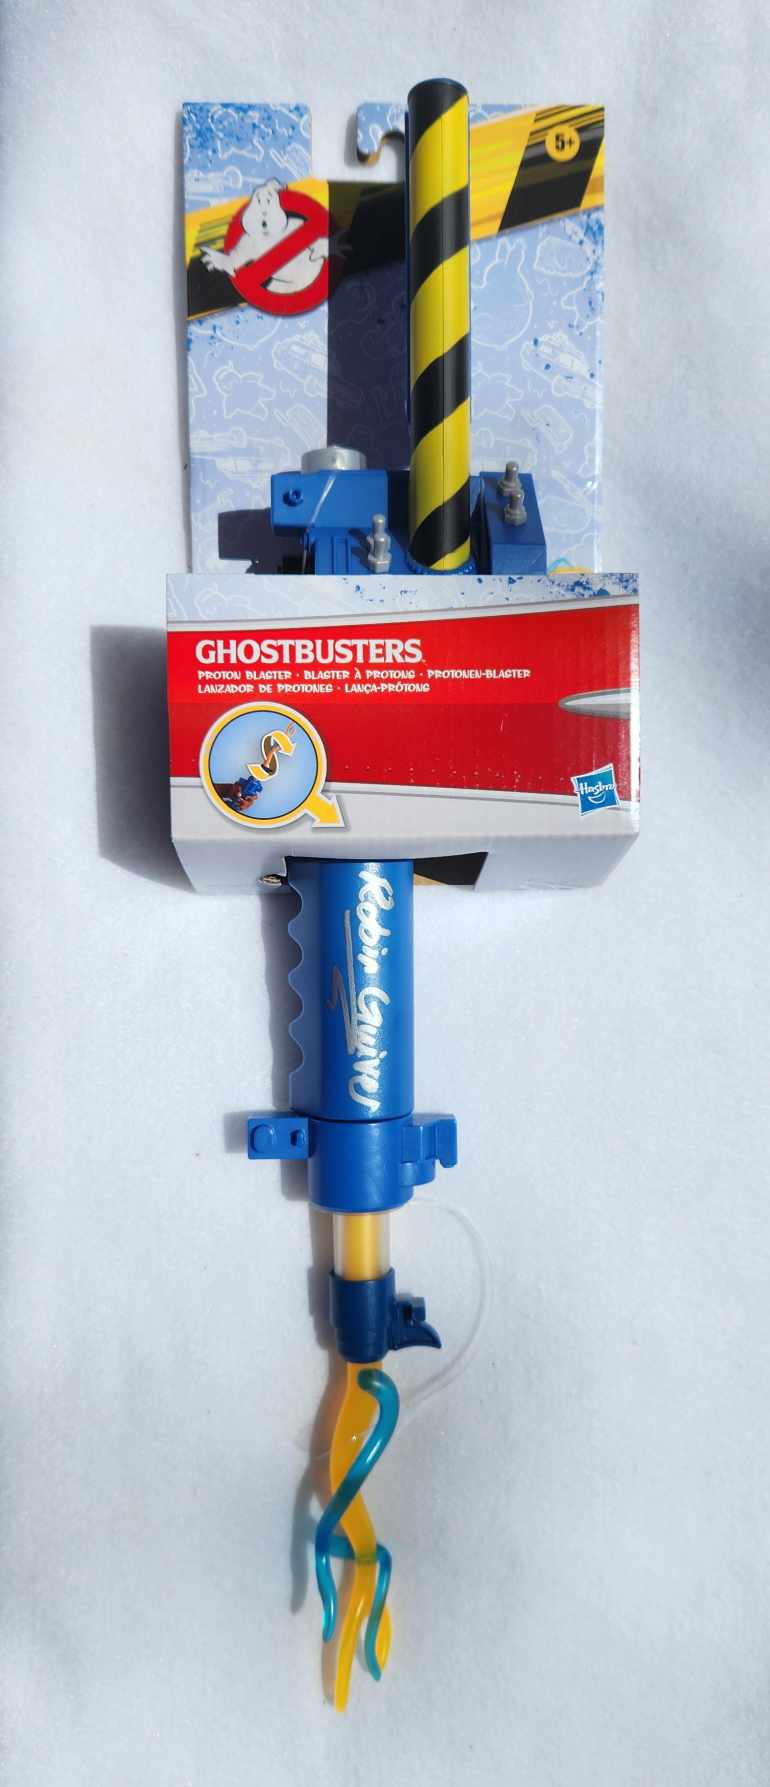 Signed "Ghostbusters" Proton Blaster